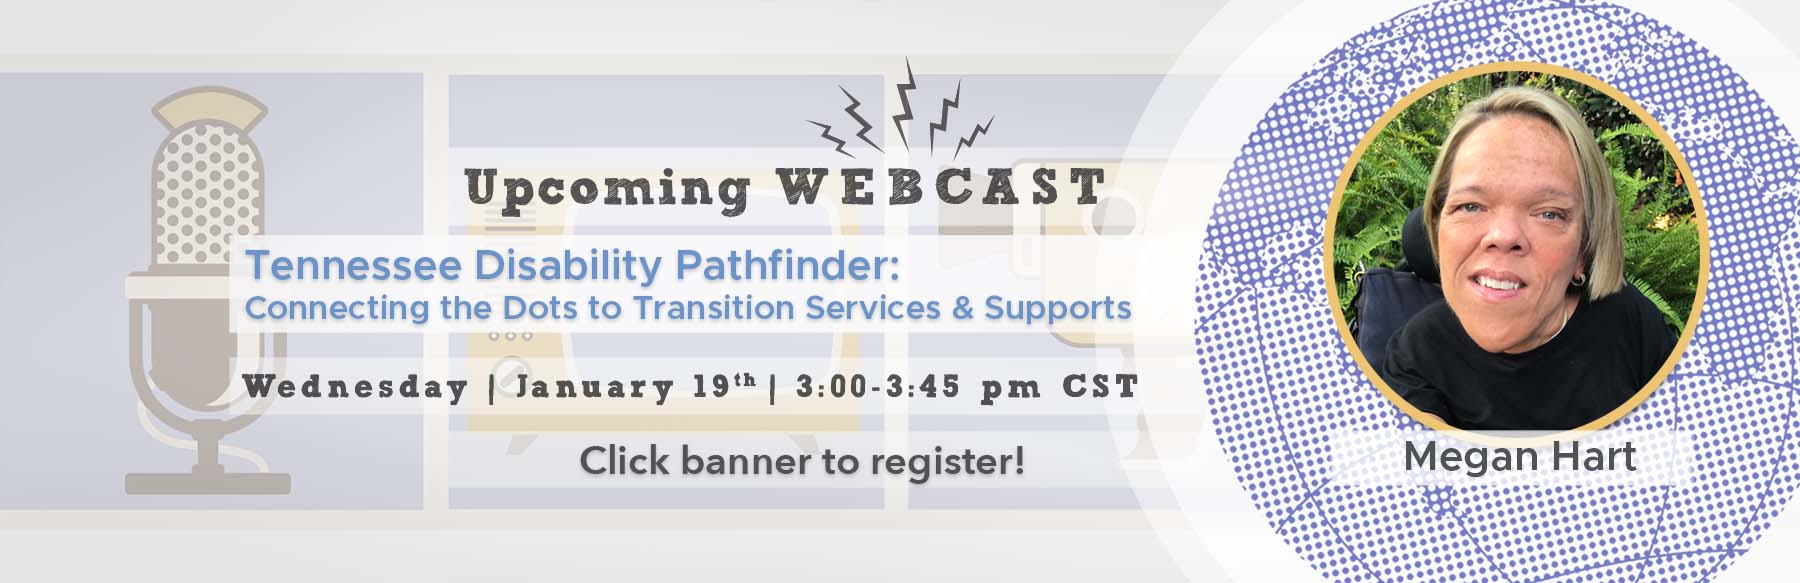 Tennessee Disability Pathfinder: Connecting hte Dots to Transition Services & Supports. Wednesday January 19th at 3 PM CST. Click to register.